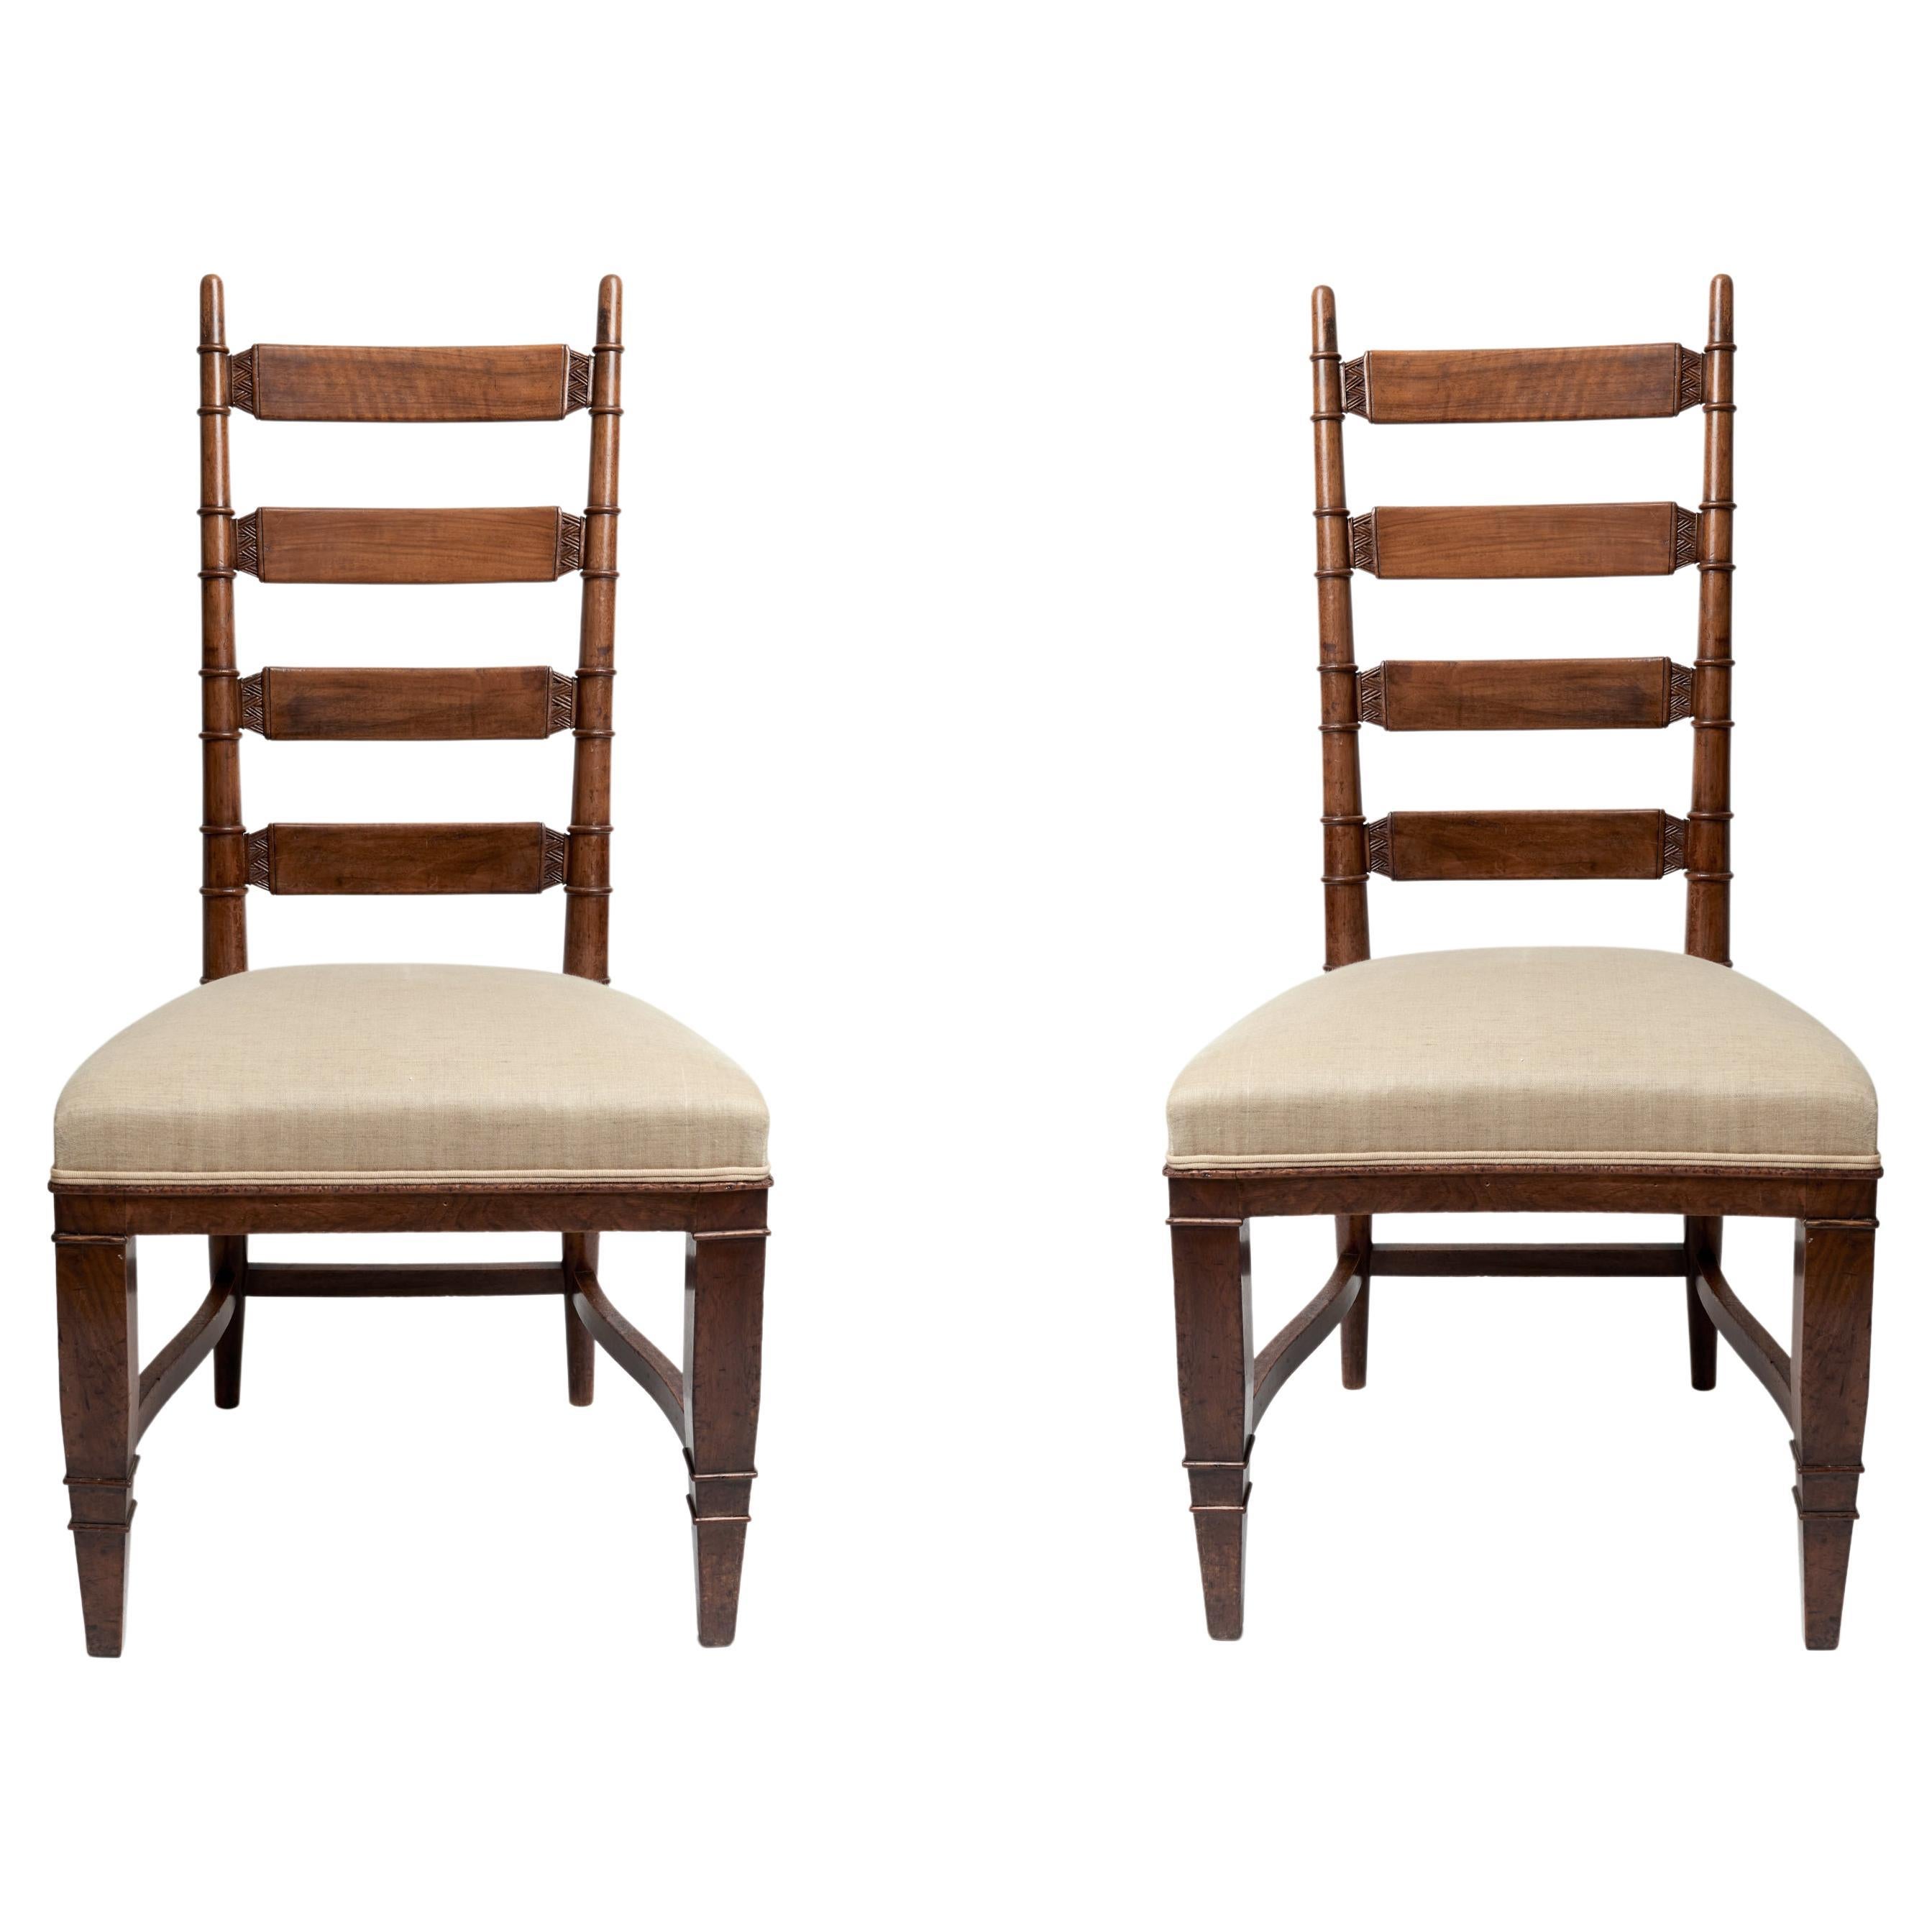 Tomaso Buzzi 1929 Pair of Wooden Structure Chairs